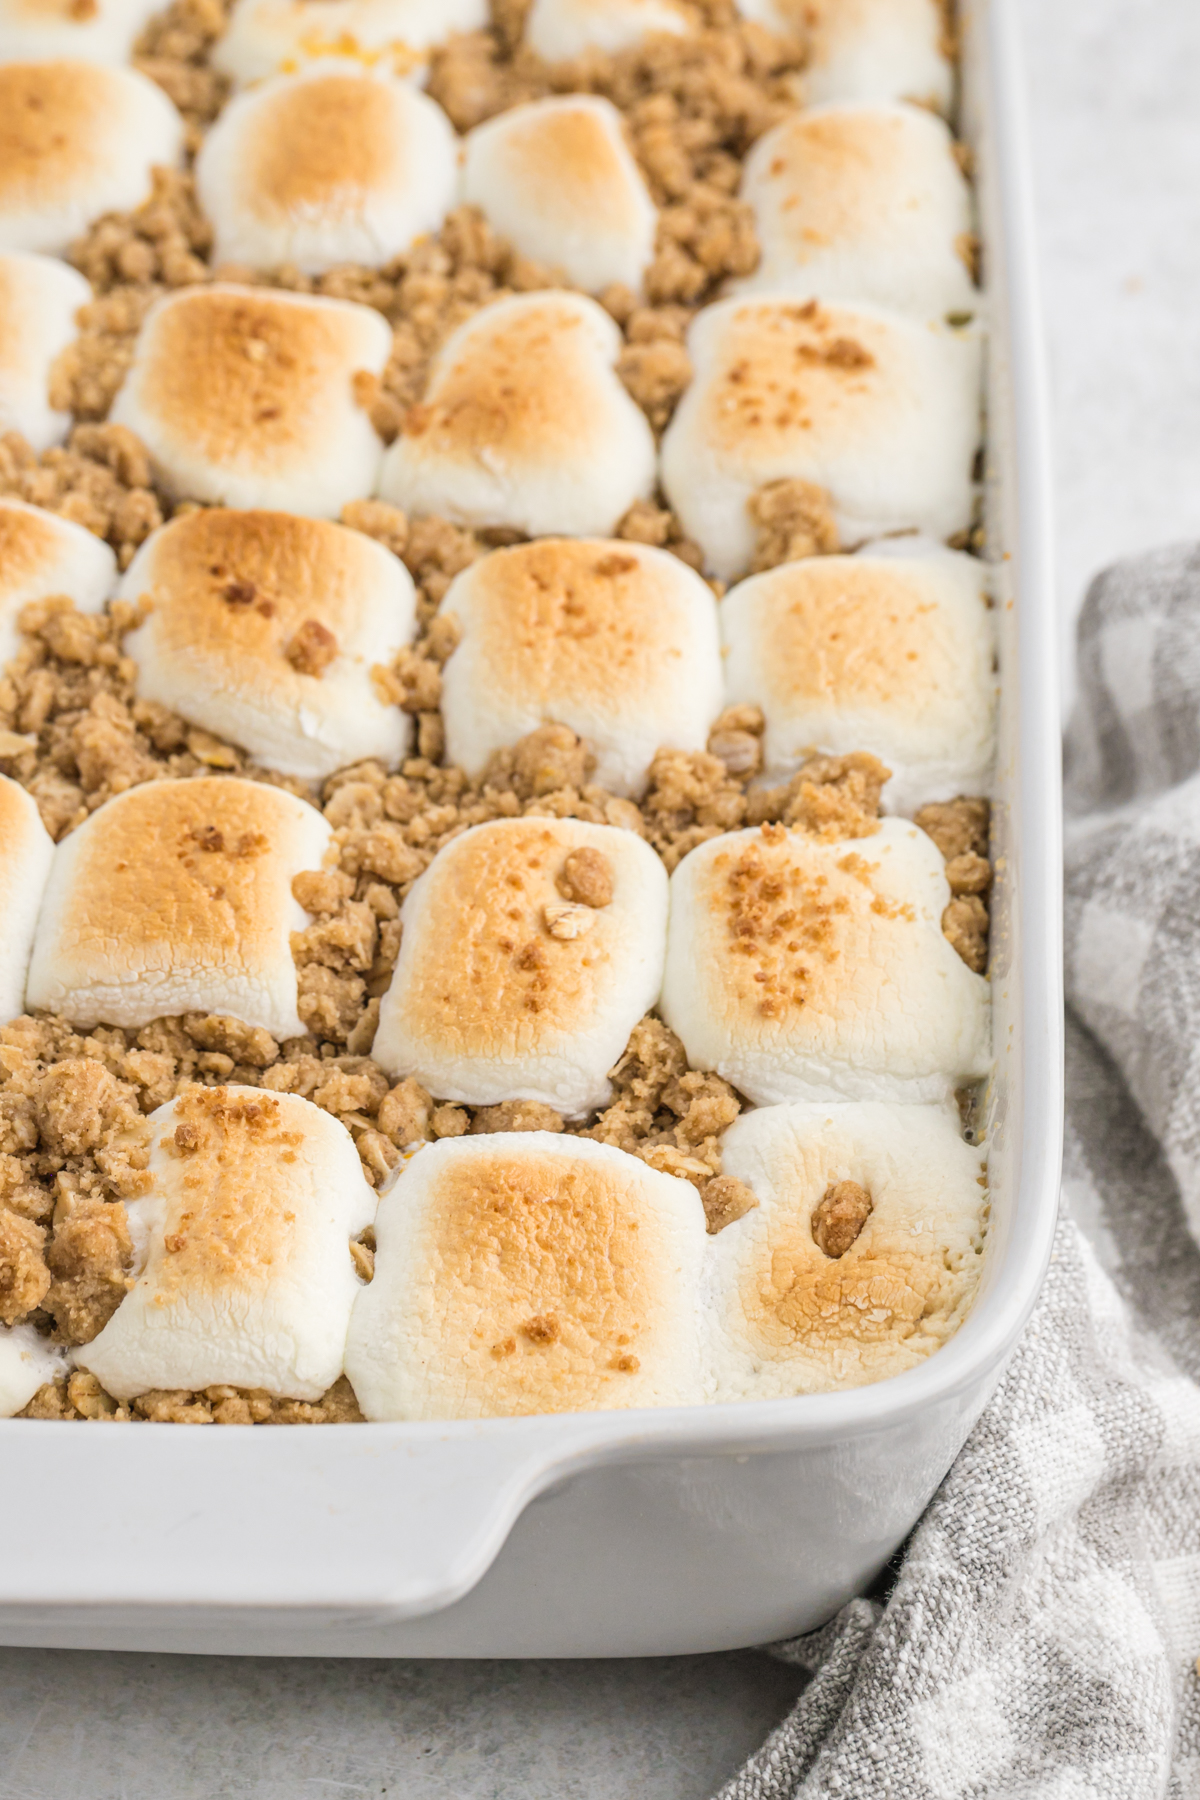 A close up of sweet potato casserole with toasted marshmallows in a white casserole dish